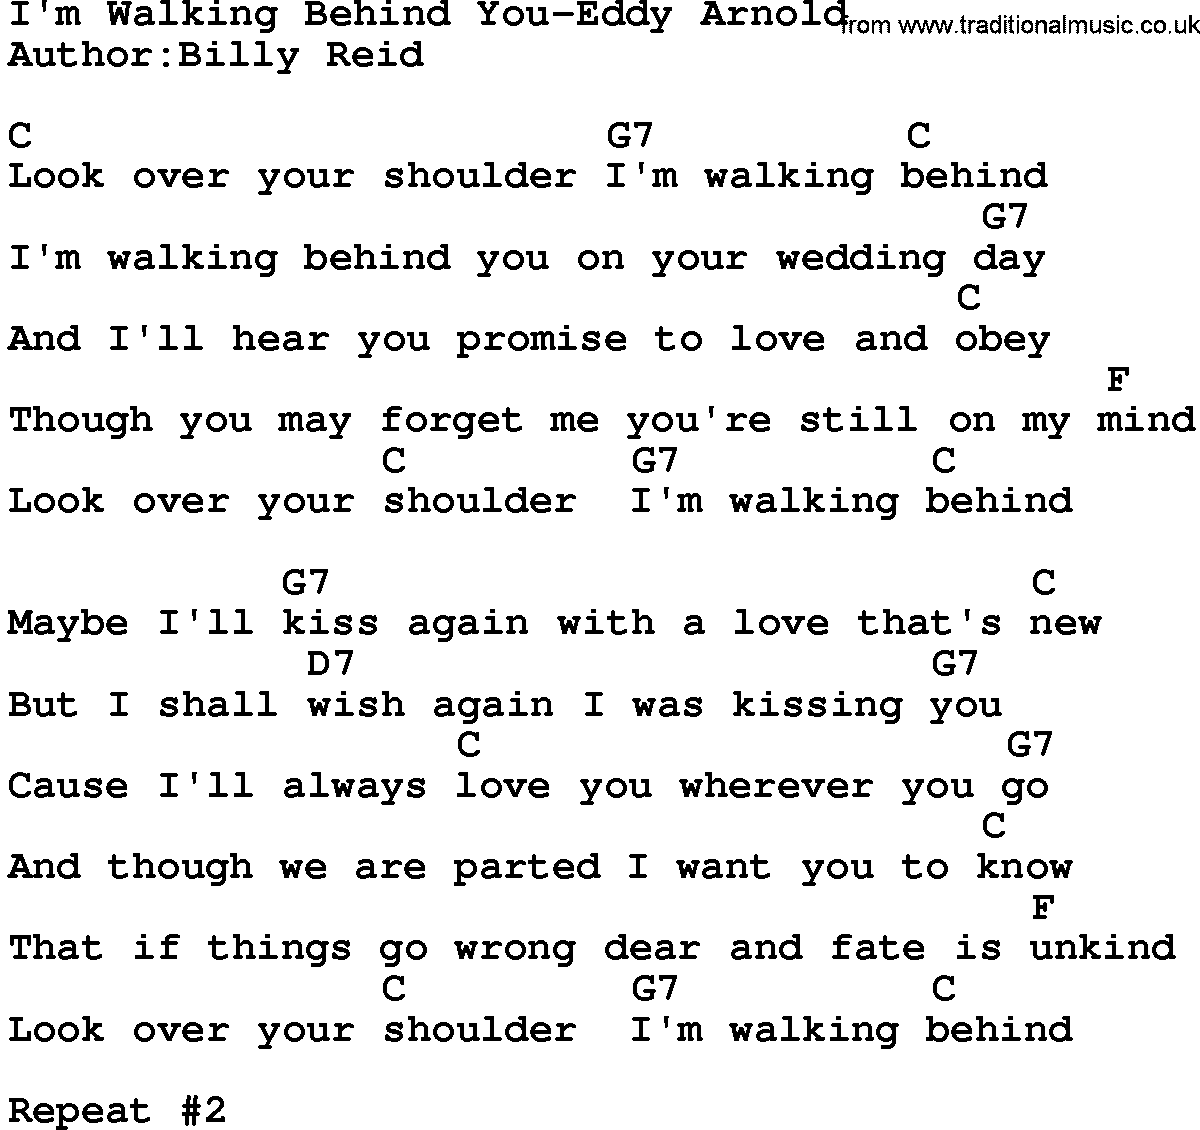 Country music song: I'm Walking Behind You-Eddy Arnold lyrics and chords